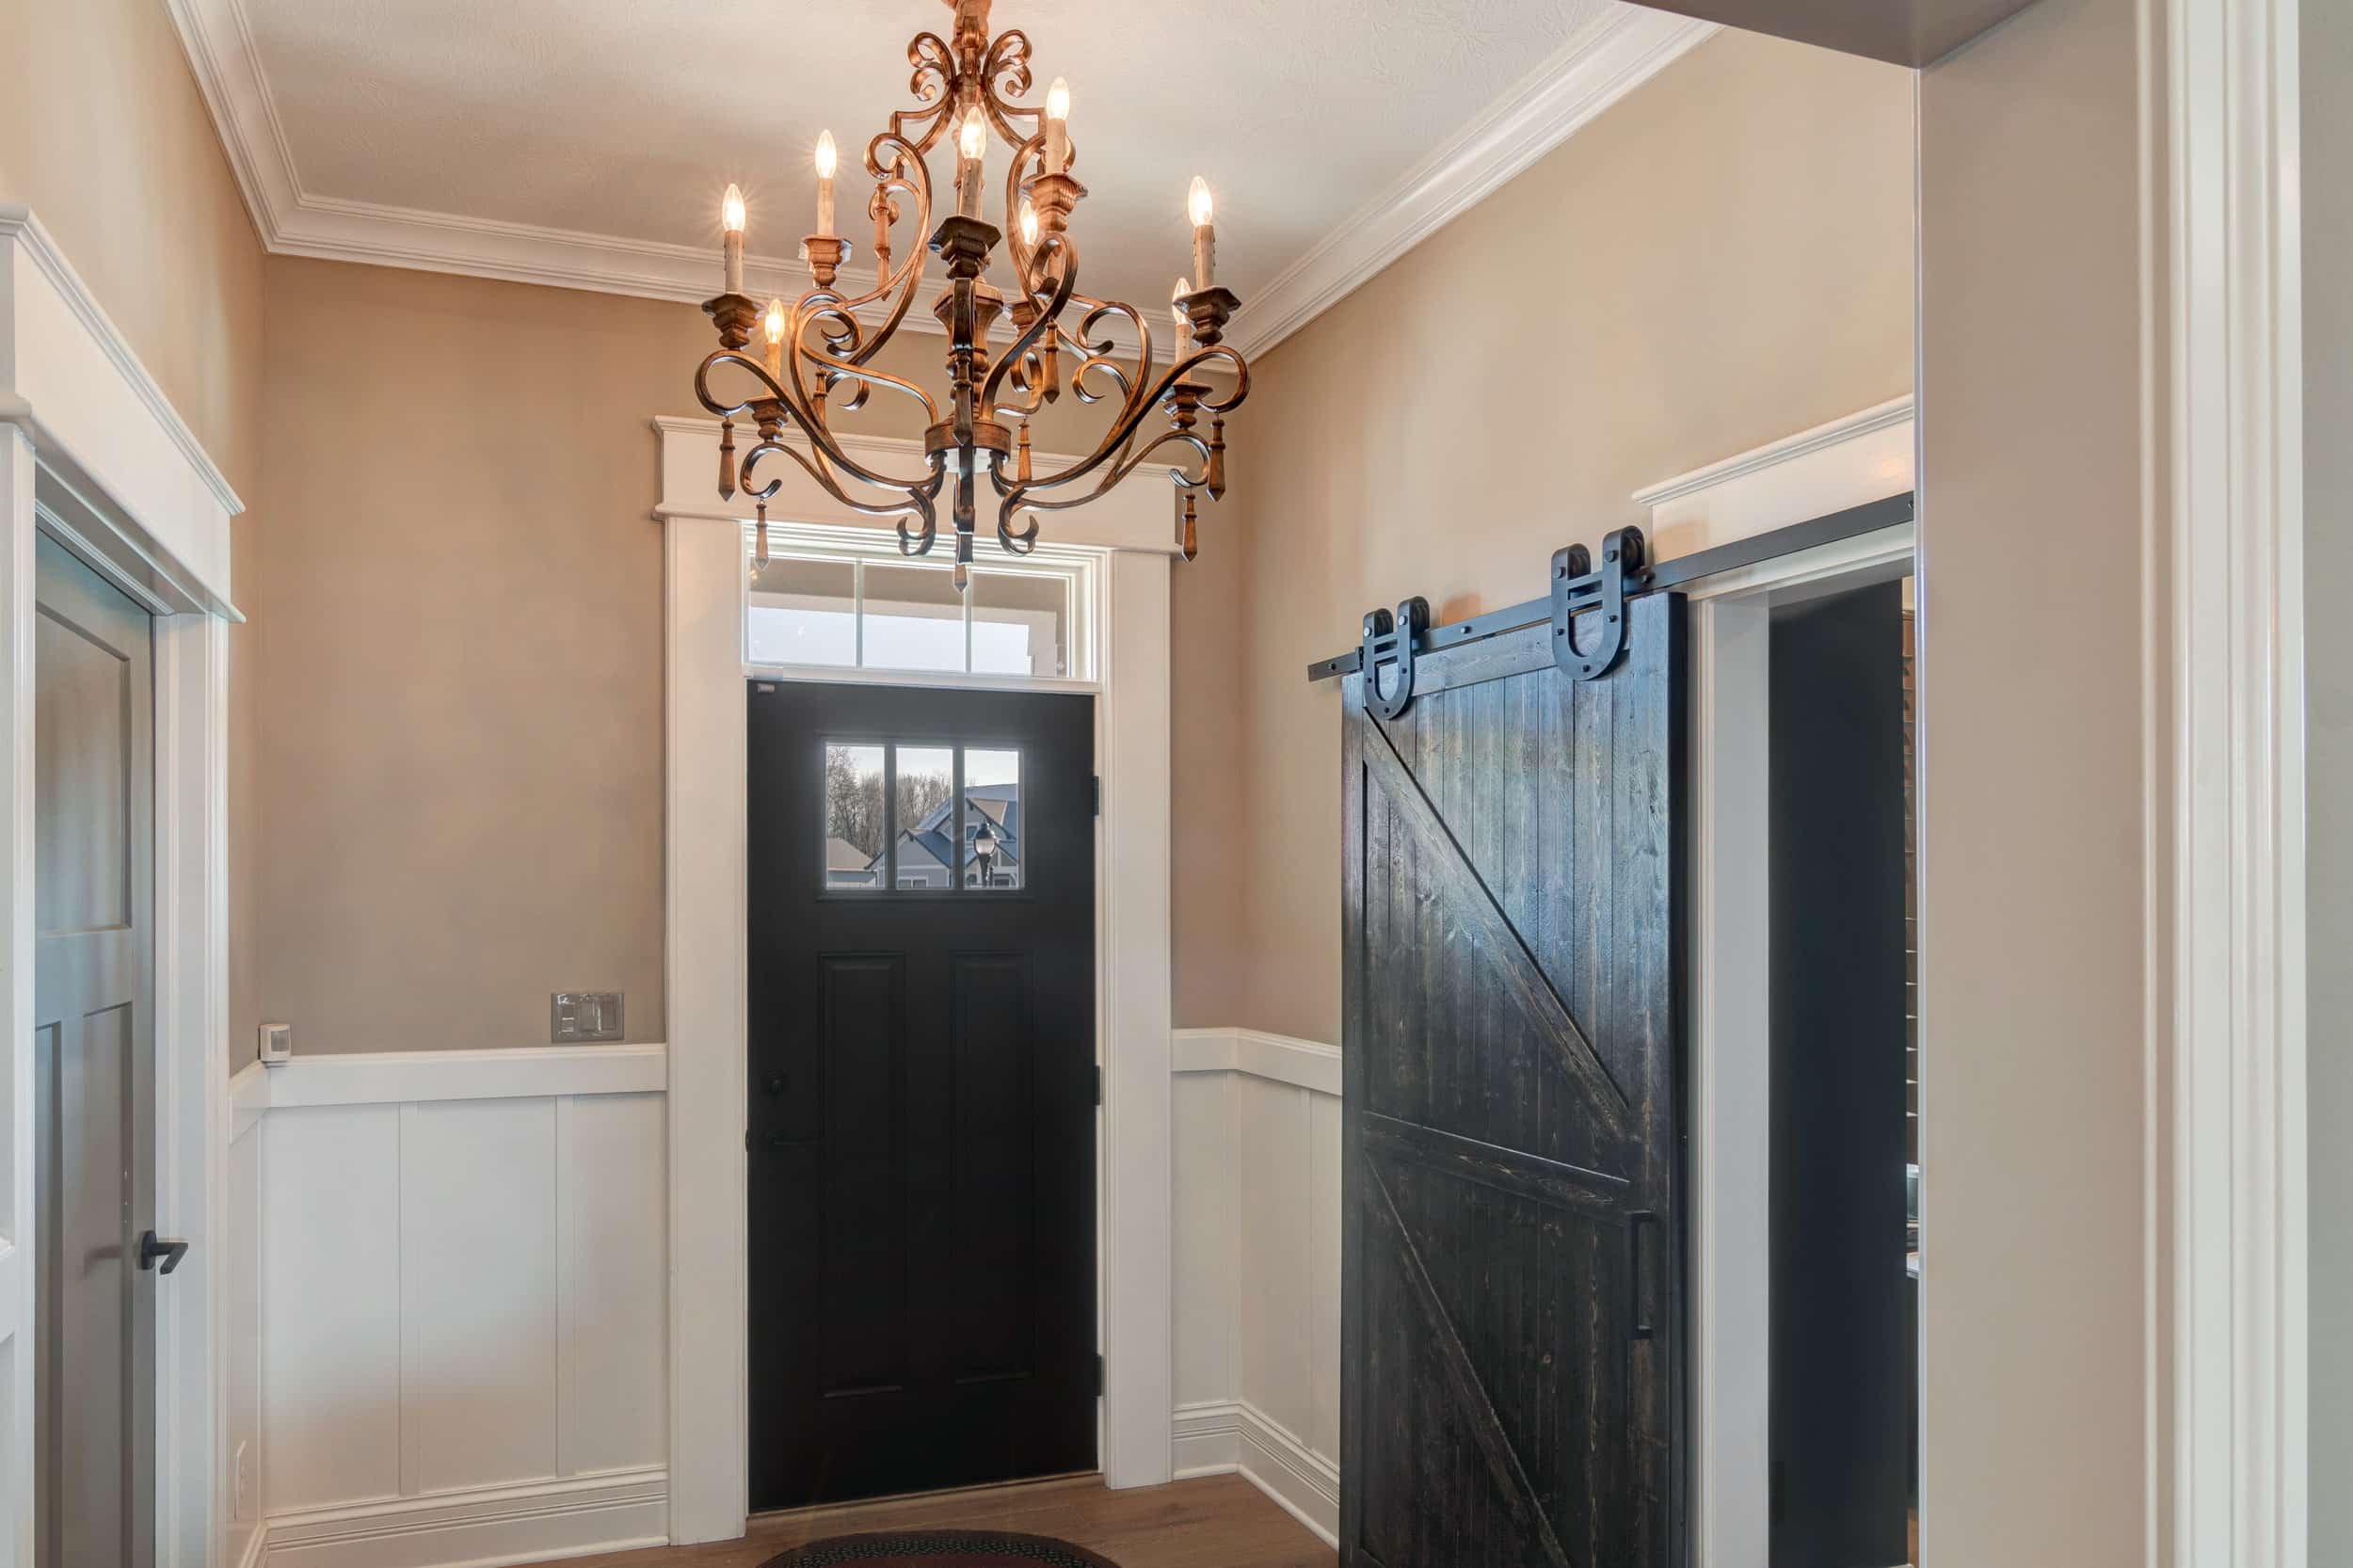 A custom hallway in a new home adorned with a stunning chandelier hanging from the ceiling, leading to an elegant black door.